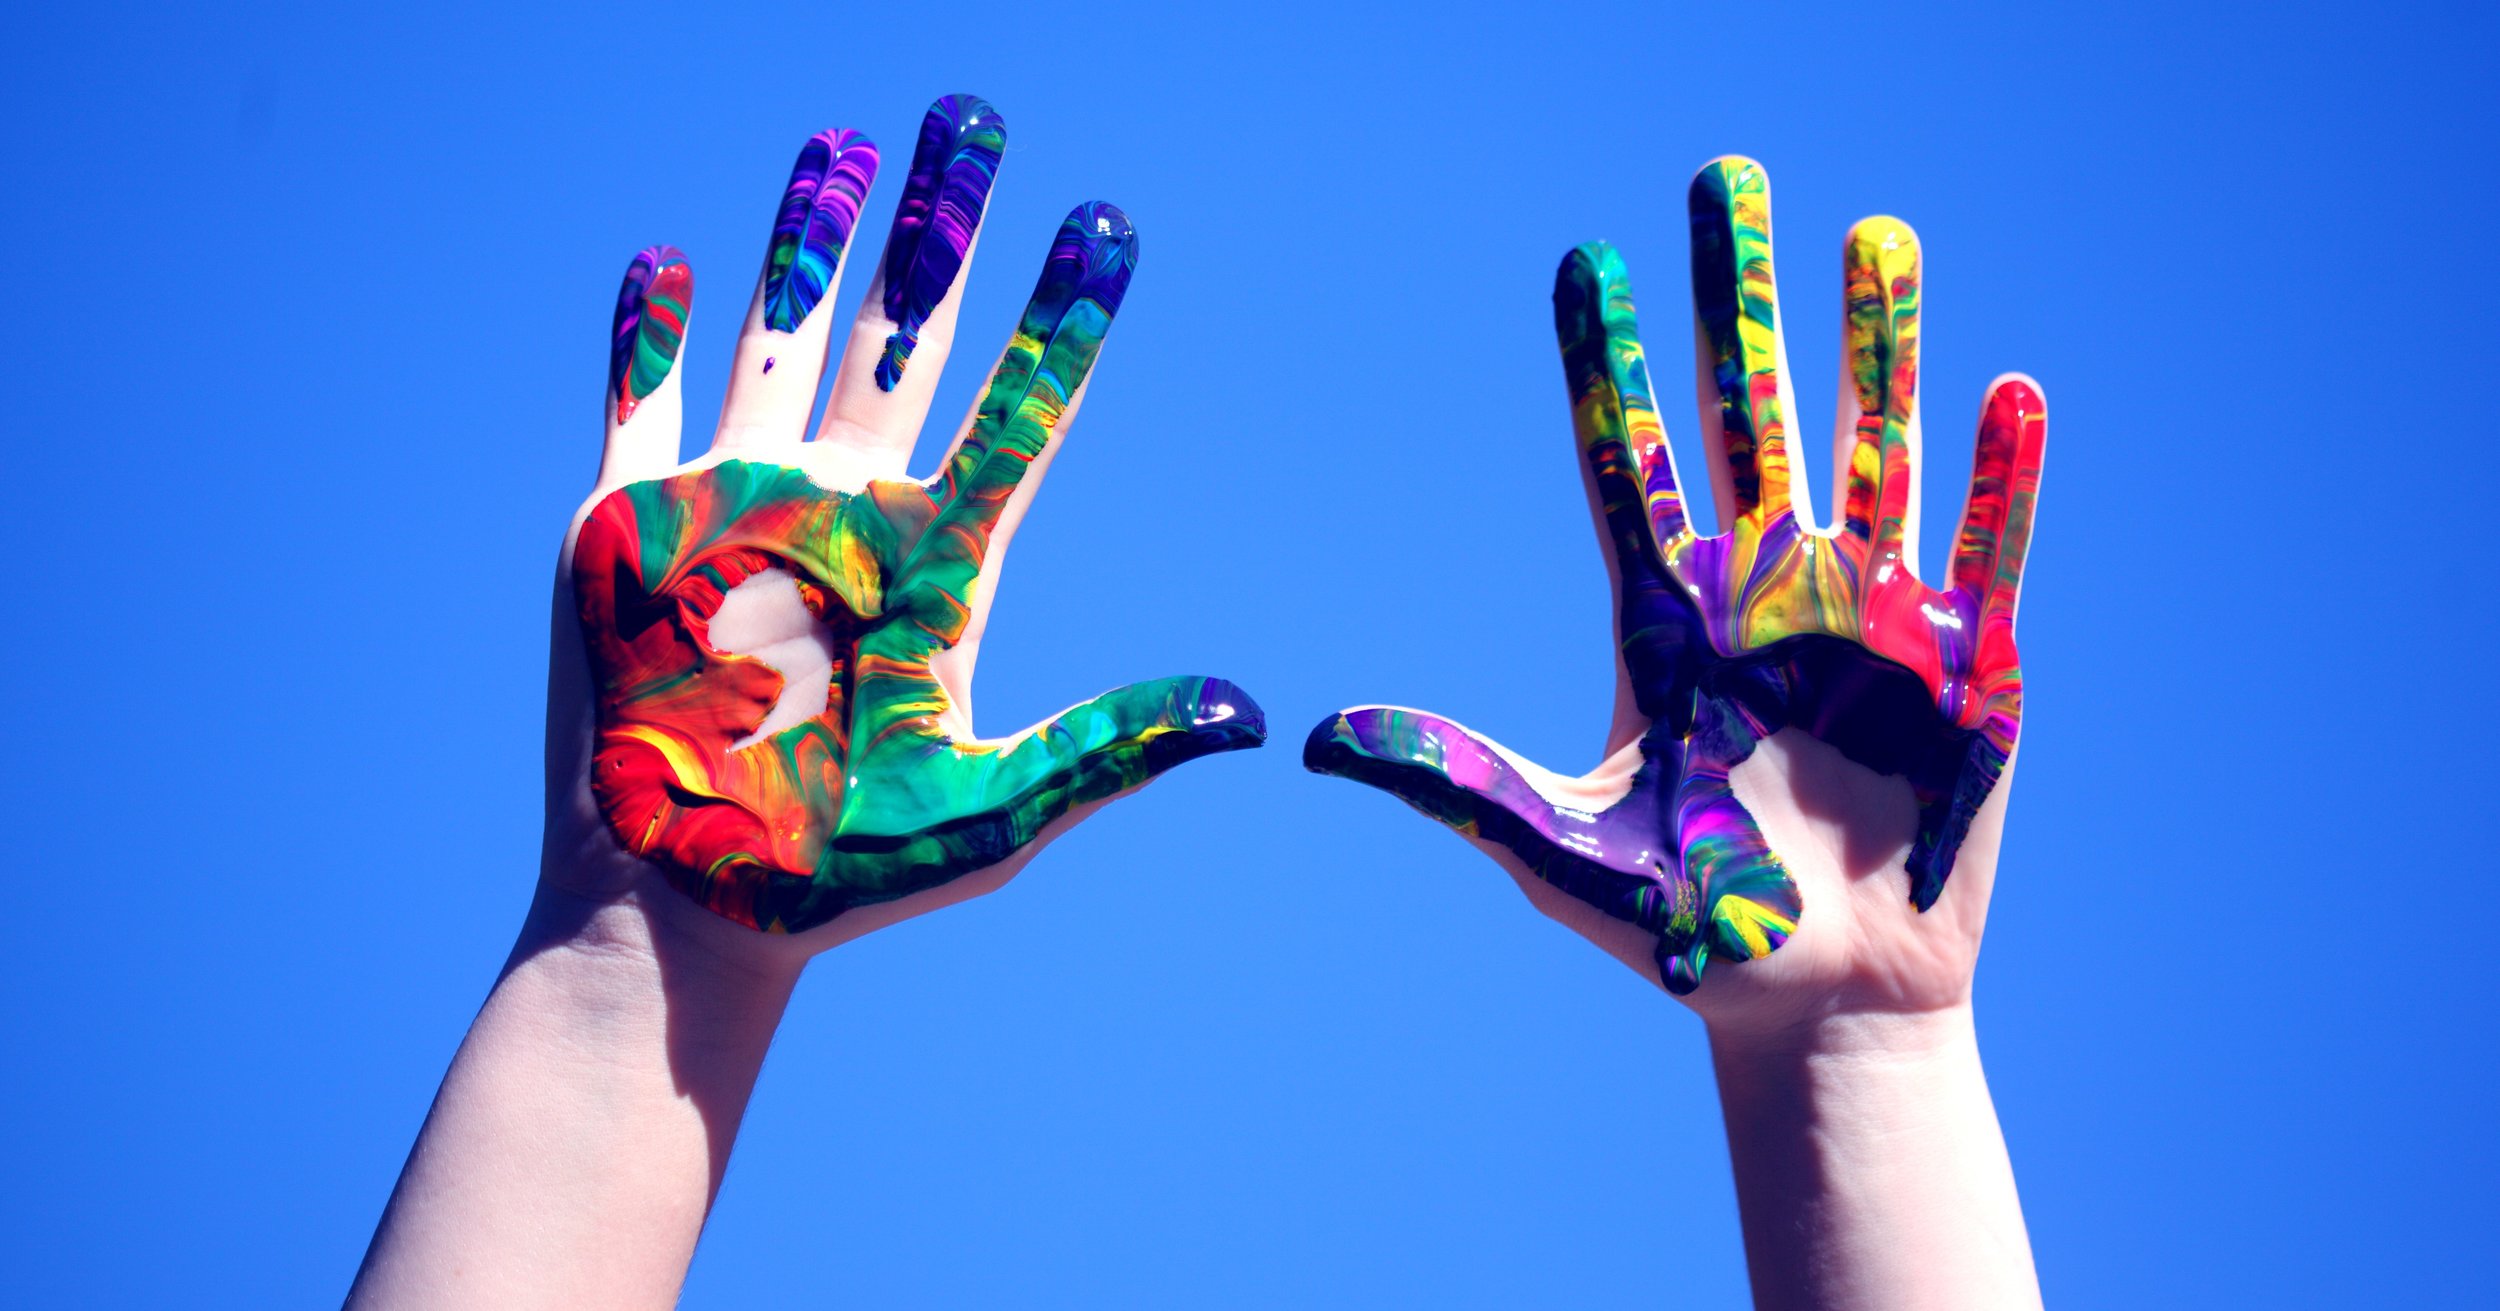 Hands With Paint.jpg